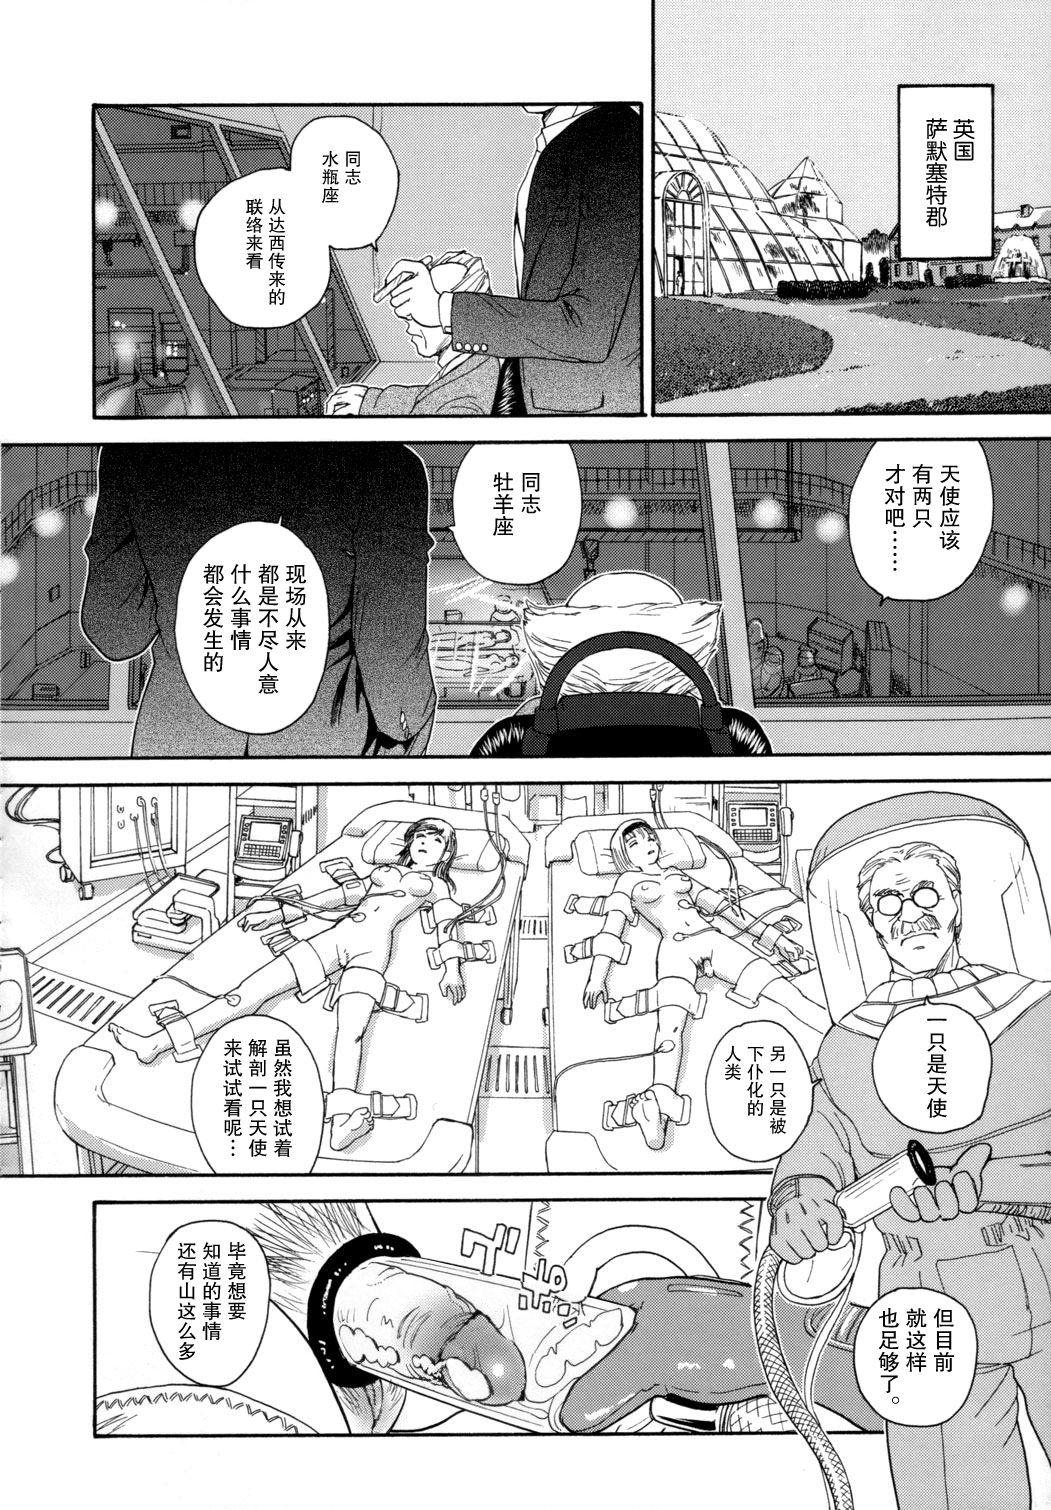 (C72) [Behind Moon (Q)] Dulce Report 9 | 达西报告 9 [Chinese] [哈尼喵汉化组] [Decensored] page 26 full